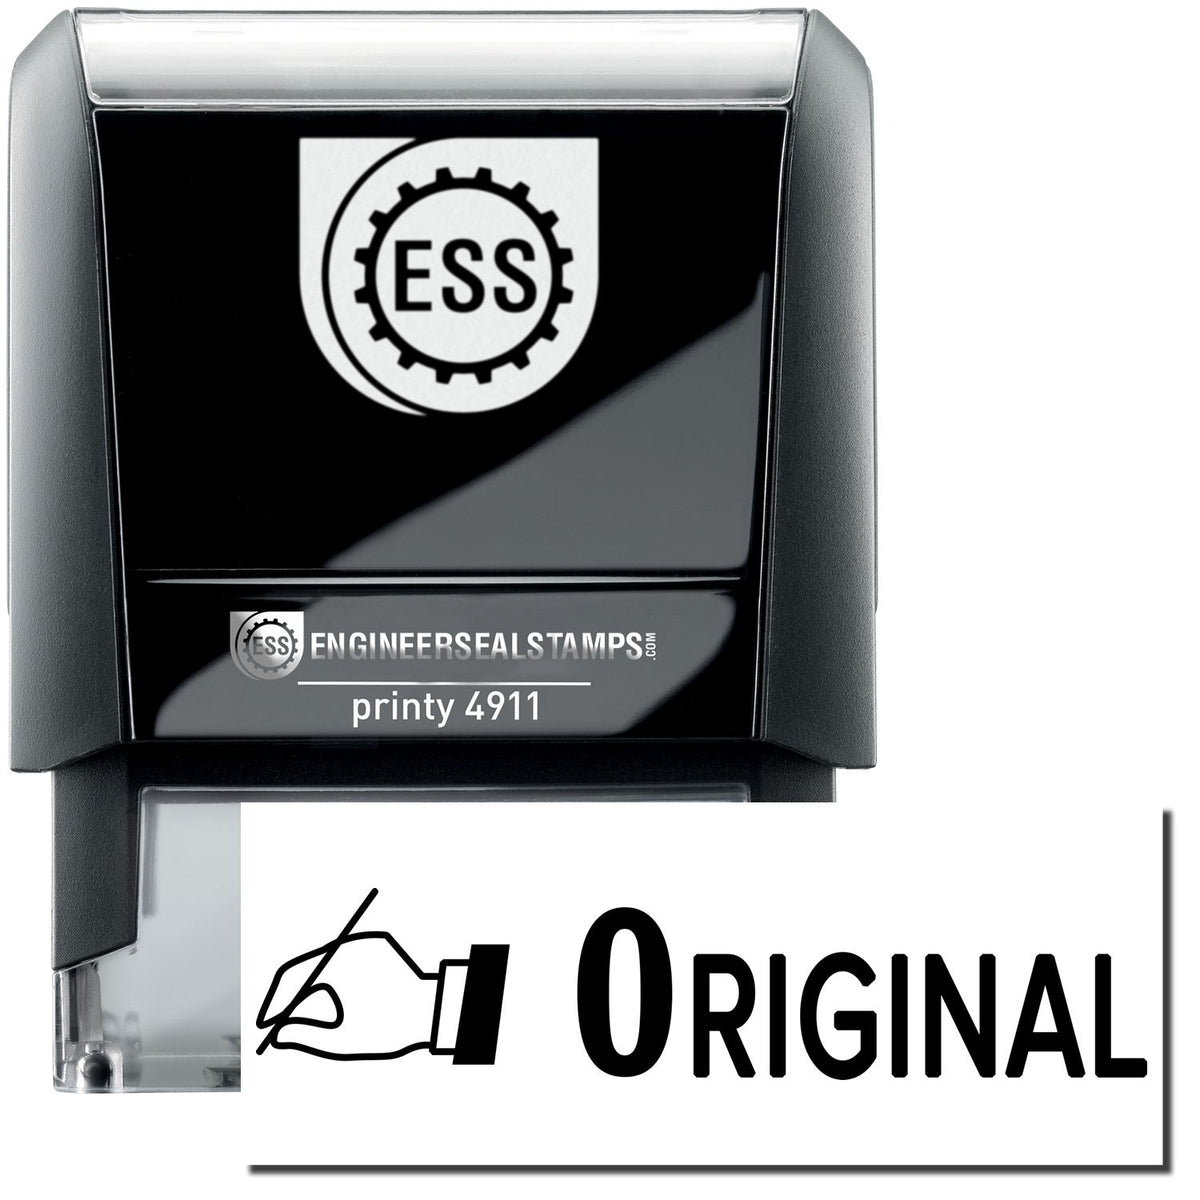 A self-inking stamp with a stamped image showing how the text &quot;ORIGINAL&quot; in a bold font and a small icon of a hand holding a pen on the left is displayed after stamping.